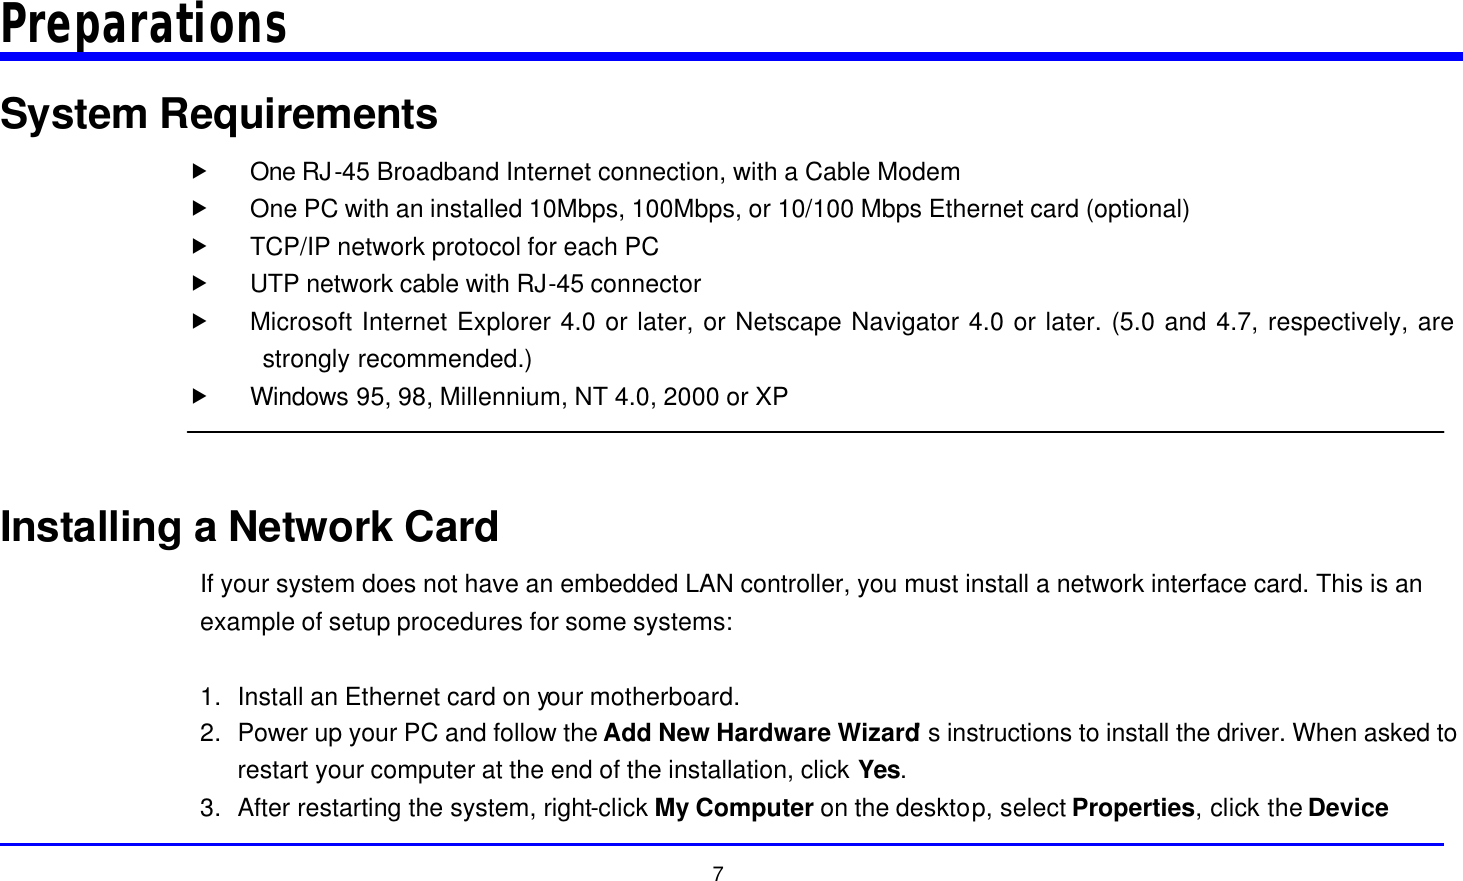  7 Preparations System Requirements „ One RJ-45 Broadband Internet connection, with a Cable Modem „ One PC with an installed 10Mbps, 100Mbps, or 10/100 Mbps Ethernet card (optional) „ TCP/IP network protocol for each PC „ UTP network cable with RJ-45 connector „ Microsoft Internet Explorer 4.0 or later, or Netscape Navigator 4.0 or later. (5.0 and 4.7, respectively, are strongly recommended.) „ Windows 95, 98, Millennium, NT 4.0, 2000 or XP   Installing a Network Card If your system does not have an embedded LAN controller, you must install a network interface card. This is an example of setup procedures for some systems:  1. Install an Ethernet card on your motherboard. 2. Power up your PC and follow the Add New Hardware Wizard’s instructions to install the driver. When asked to restart your computer at the end of the installation, click Yes. 3. After restarting the system, right-click My Computer on the desktop, select Properties, click the Device 